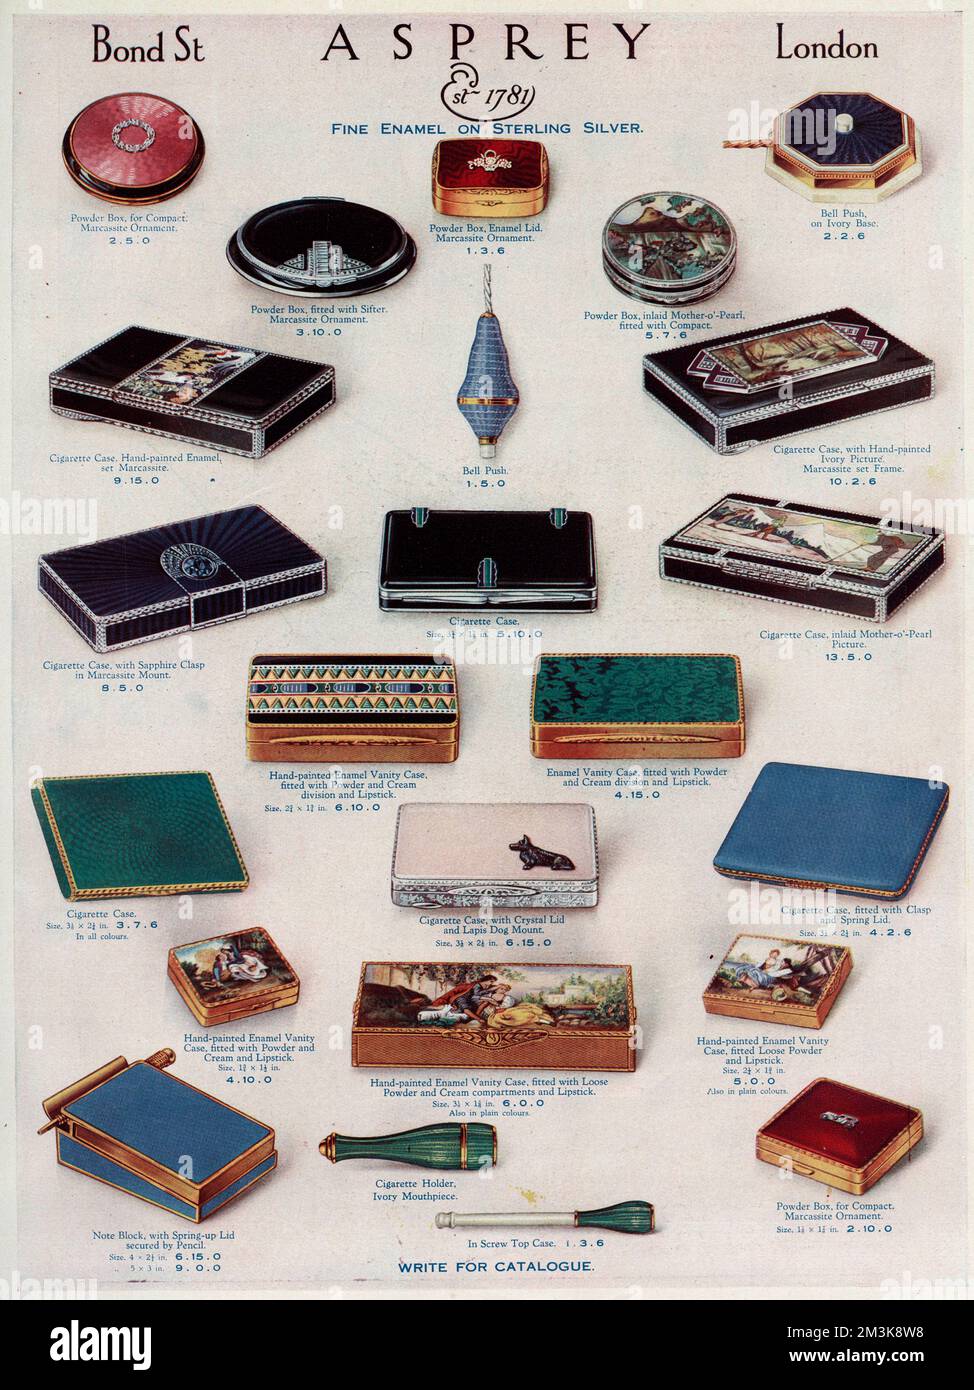 Asprey of Bond Street displaying a wide variety of Christmas present ideas for the woman, including lots of cigarette cases, cigarette holder, vanity case and powder boxes.      Date:  1930 Stock Photo